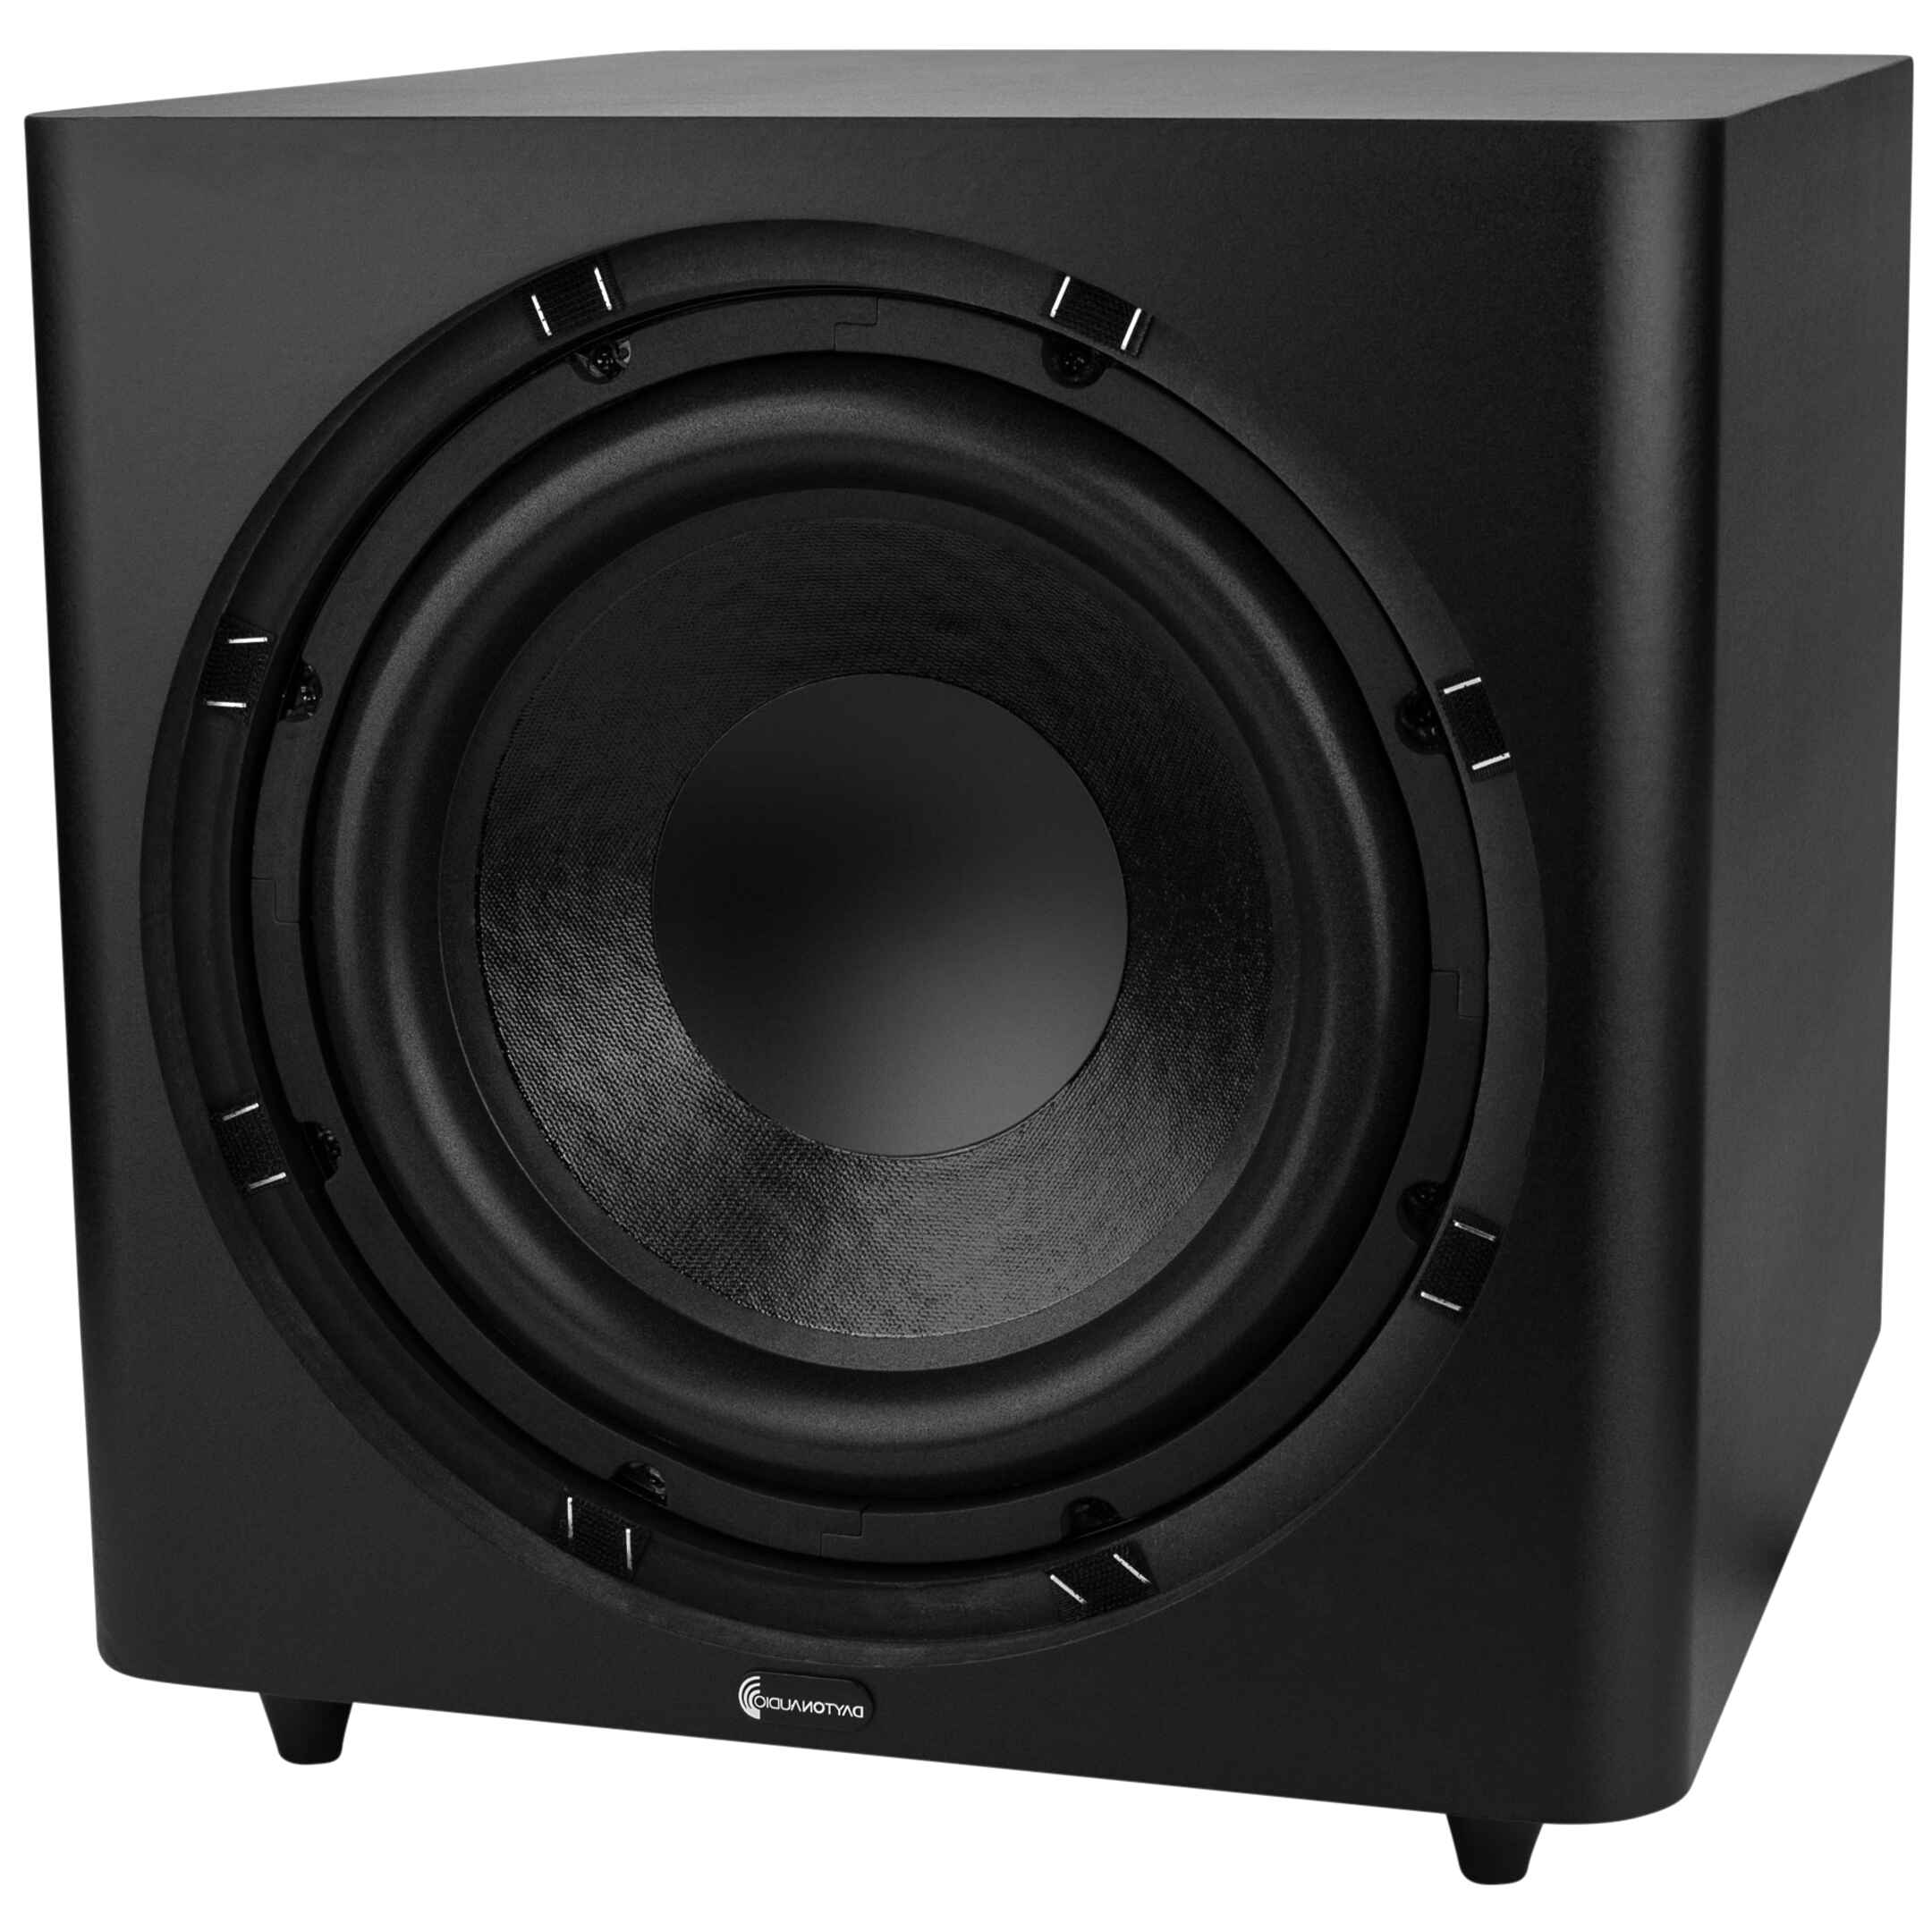 Subwoofer for sale in UK 109 used Subwoofers